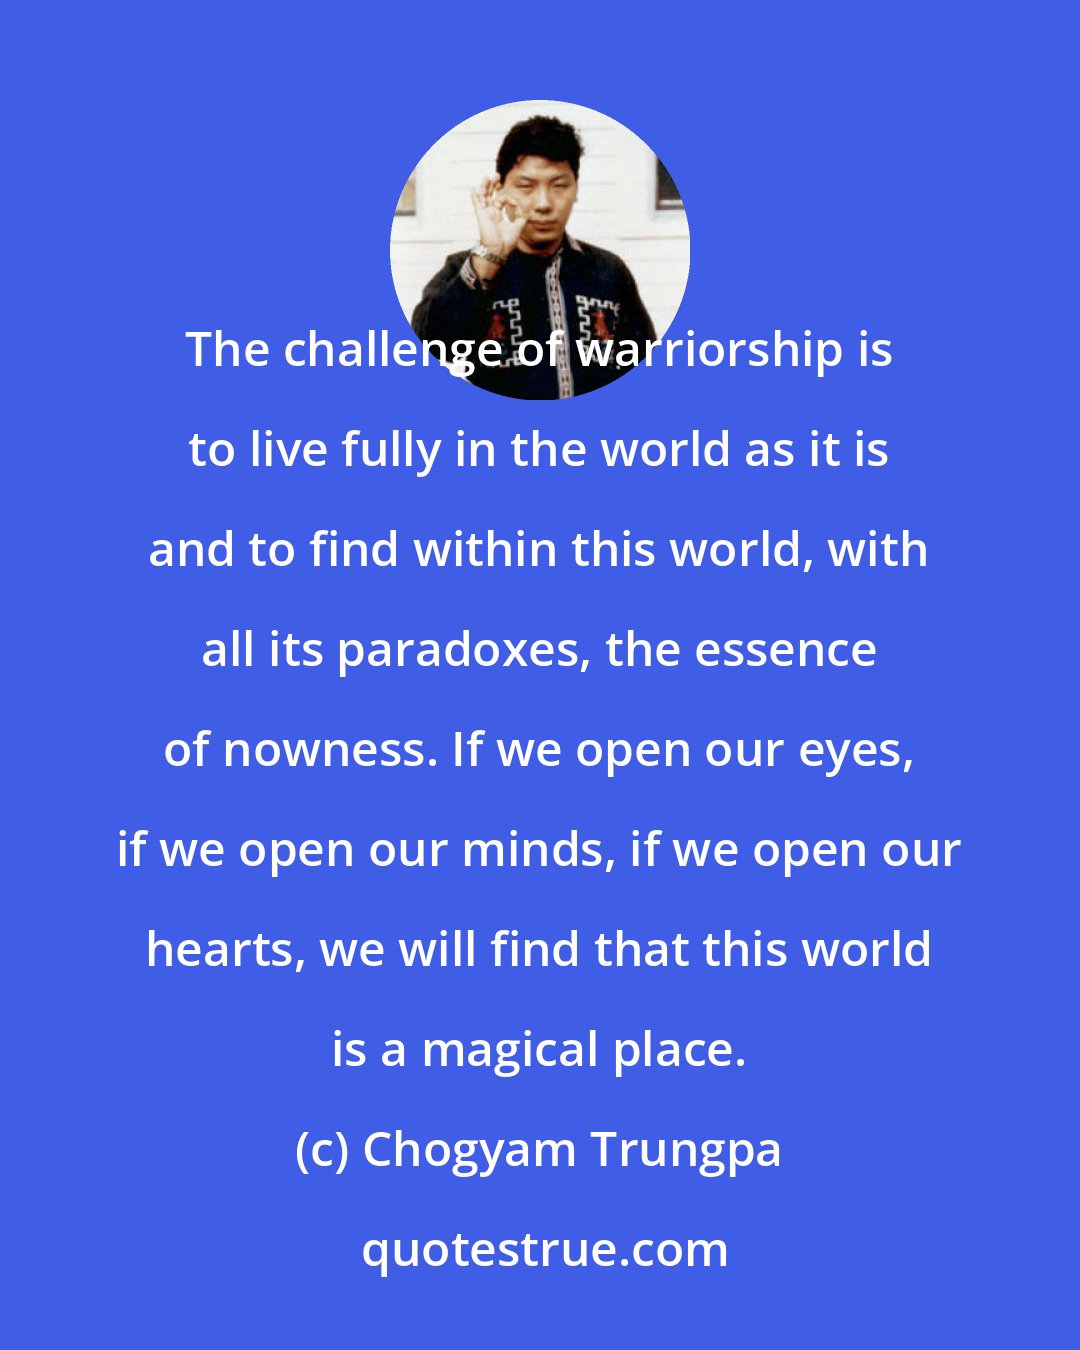 Chogyam Trungpa: The challenge of warriorship is to live fully in the world as it is and to find within this world, with all its paradoxes, the essence of nowness. If we open our eyes, if we open our minds, if we open our hearts, we will find that this world is a magical place.